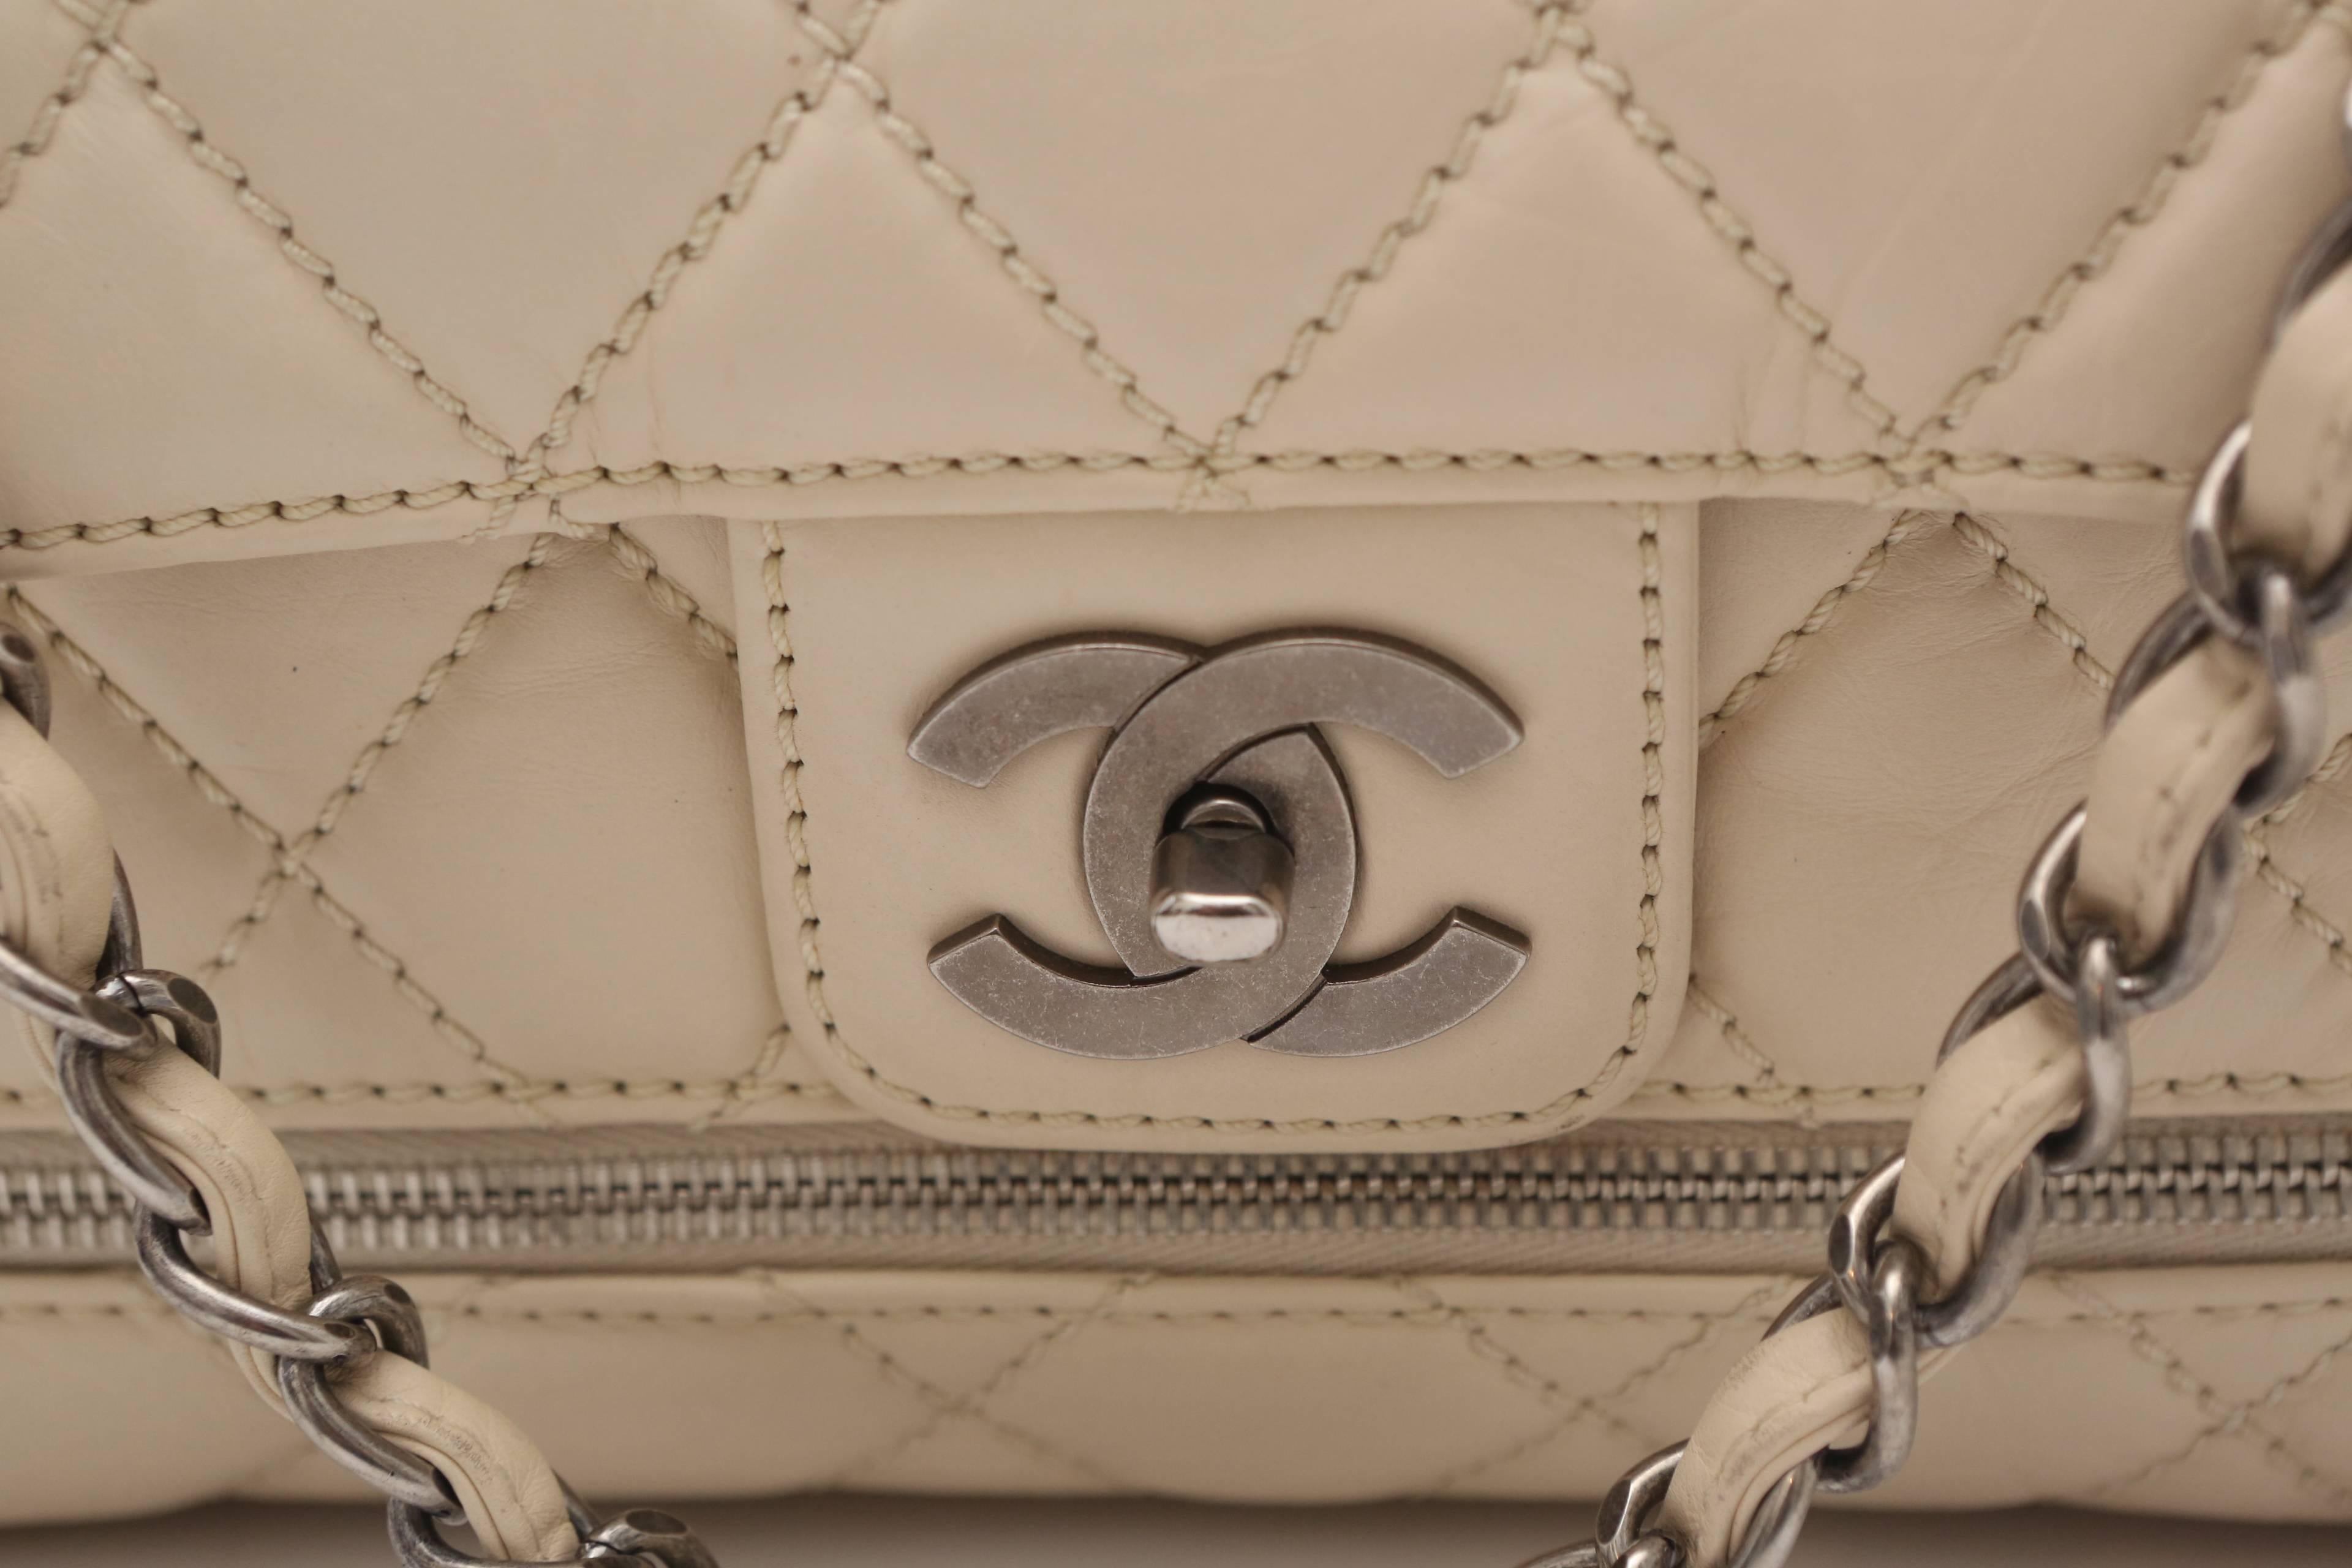 This Chanel Paris/New York (PNY) Expandable Flap Bag is made of Distressed Calfskin and Aged Silver hardware. CC turnlock closure on front and slip pocket on back. Right side of bag had logo embossed Silver plate. Zipper runs around base of bag and